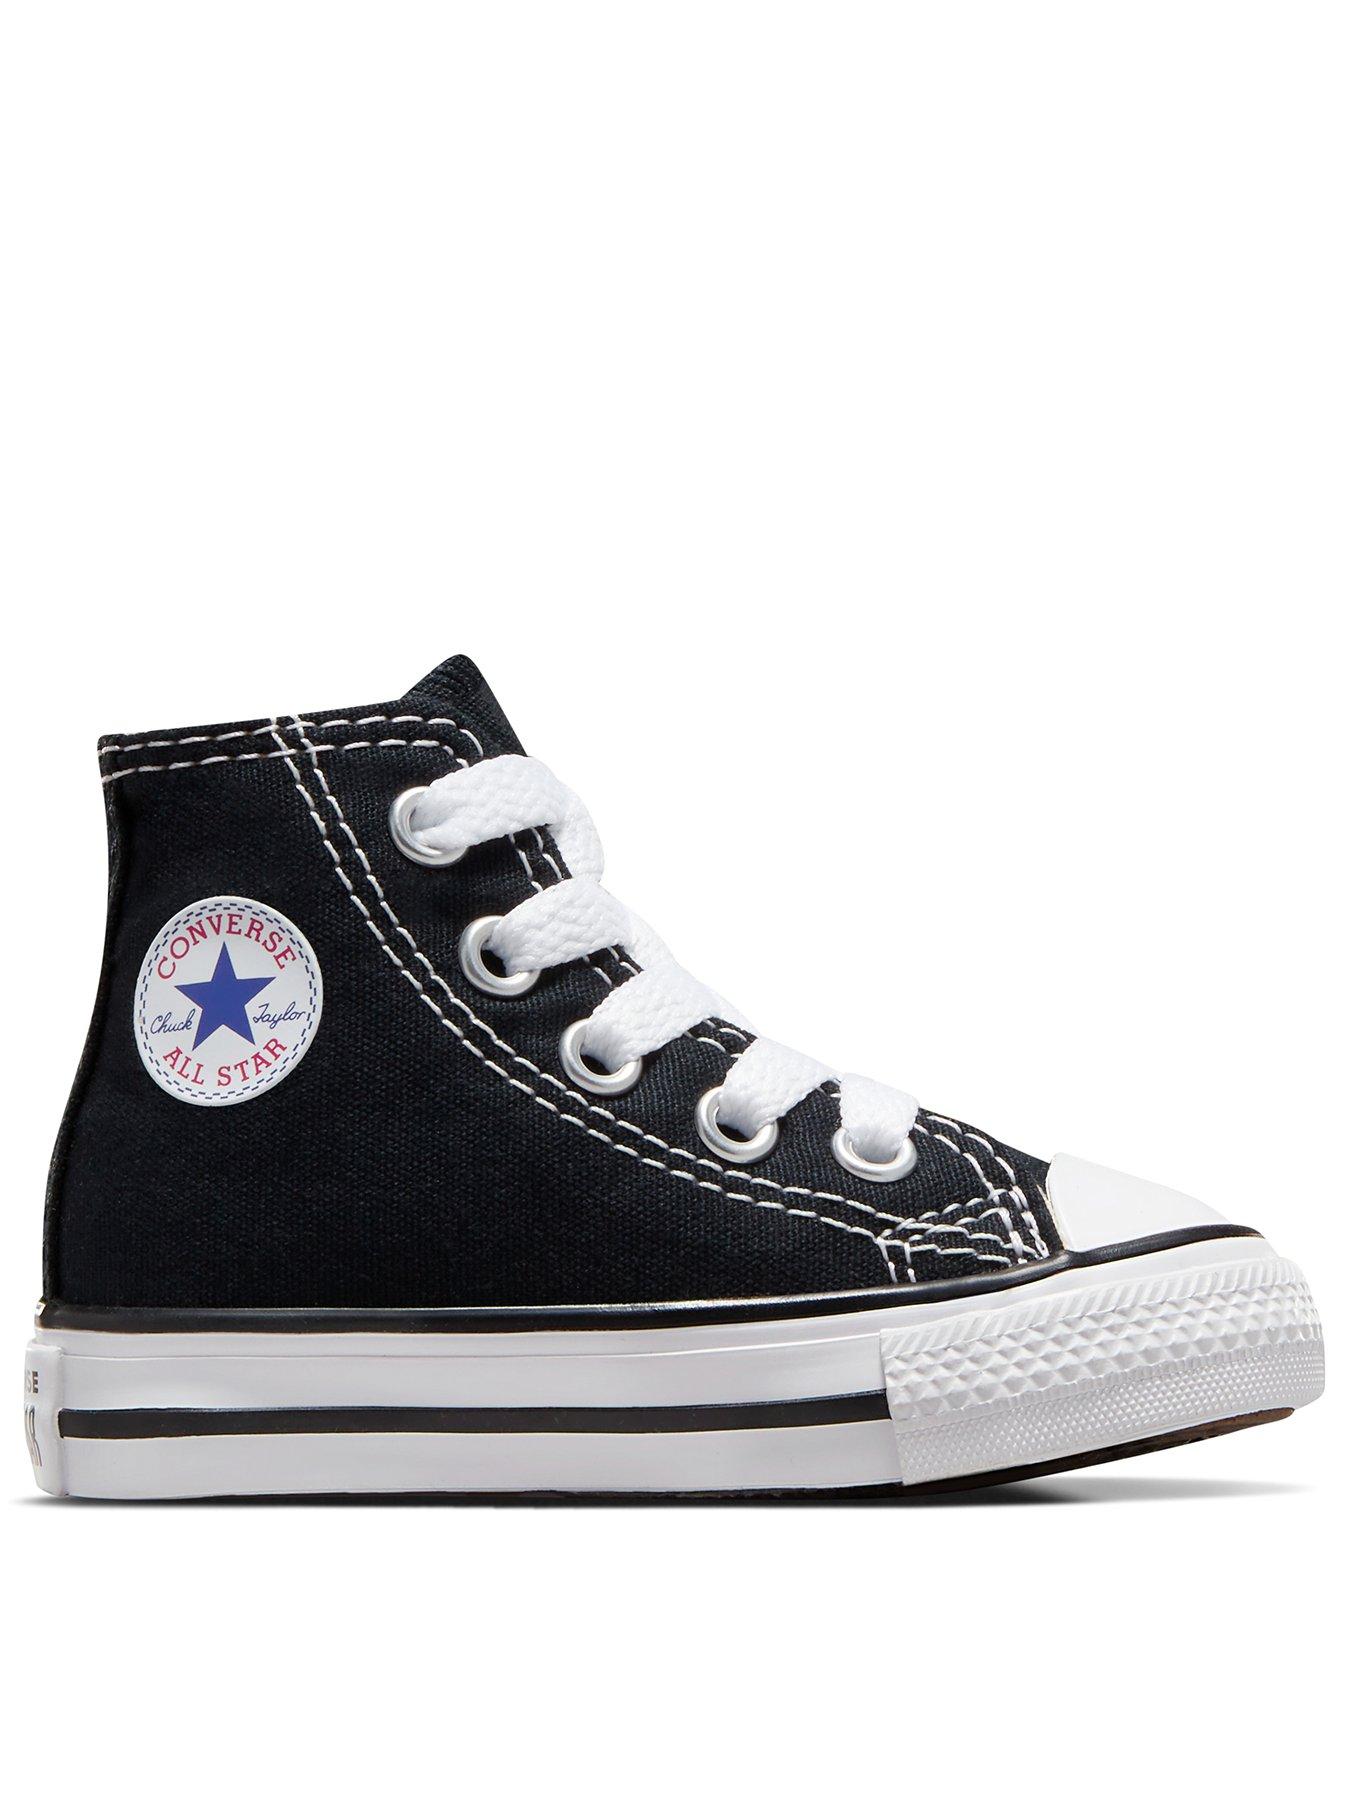 converse chuck taylor all star size 4